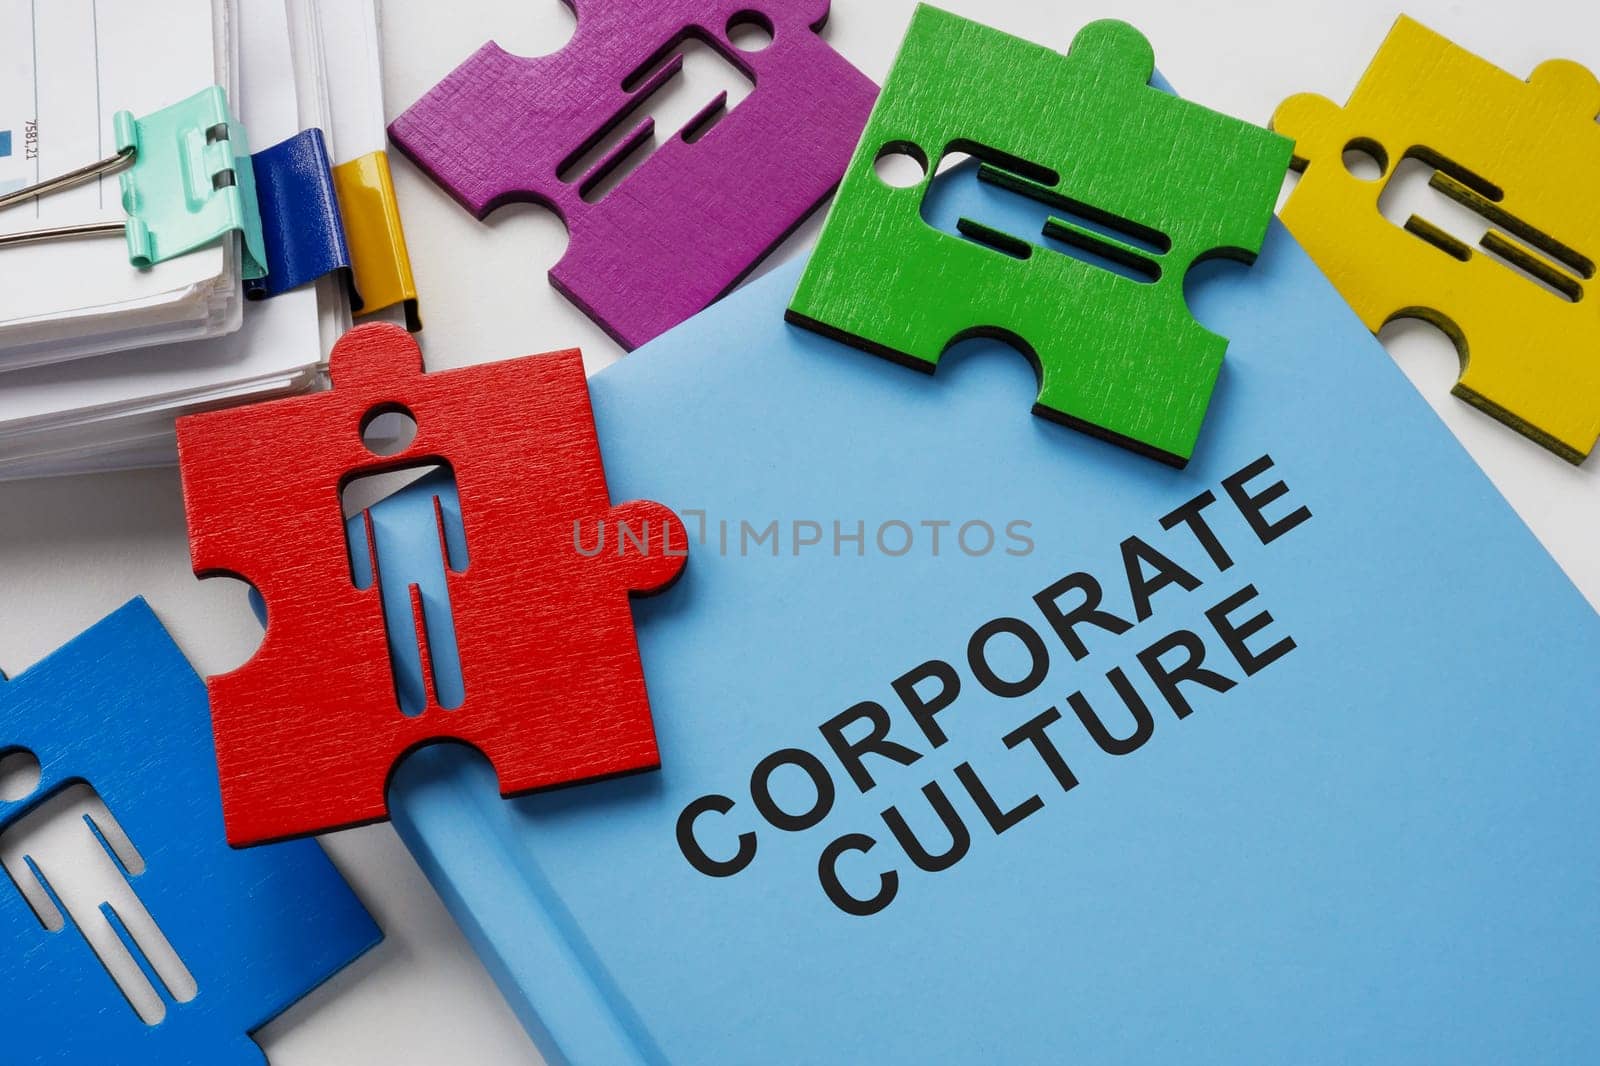 A book about corporate culture and puzzle pieces. by designer491